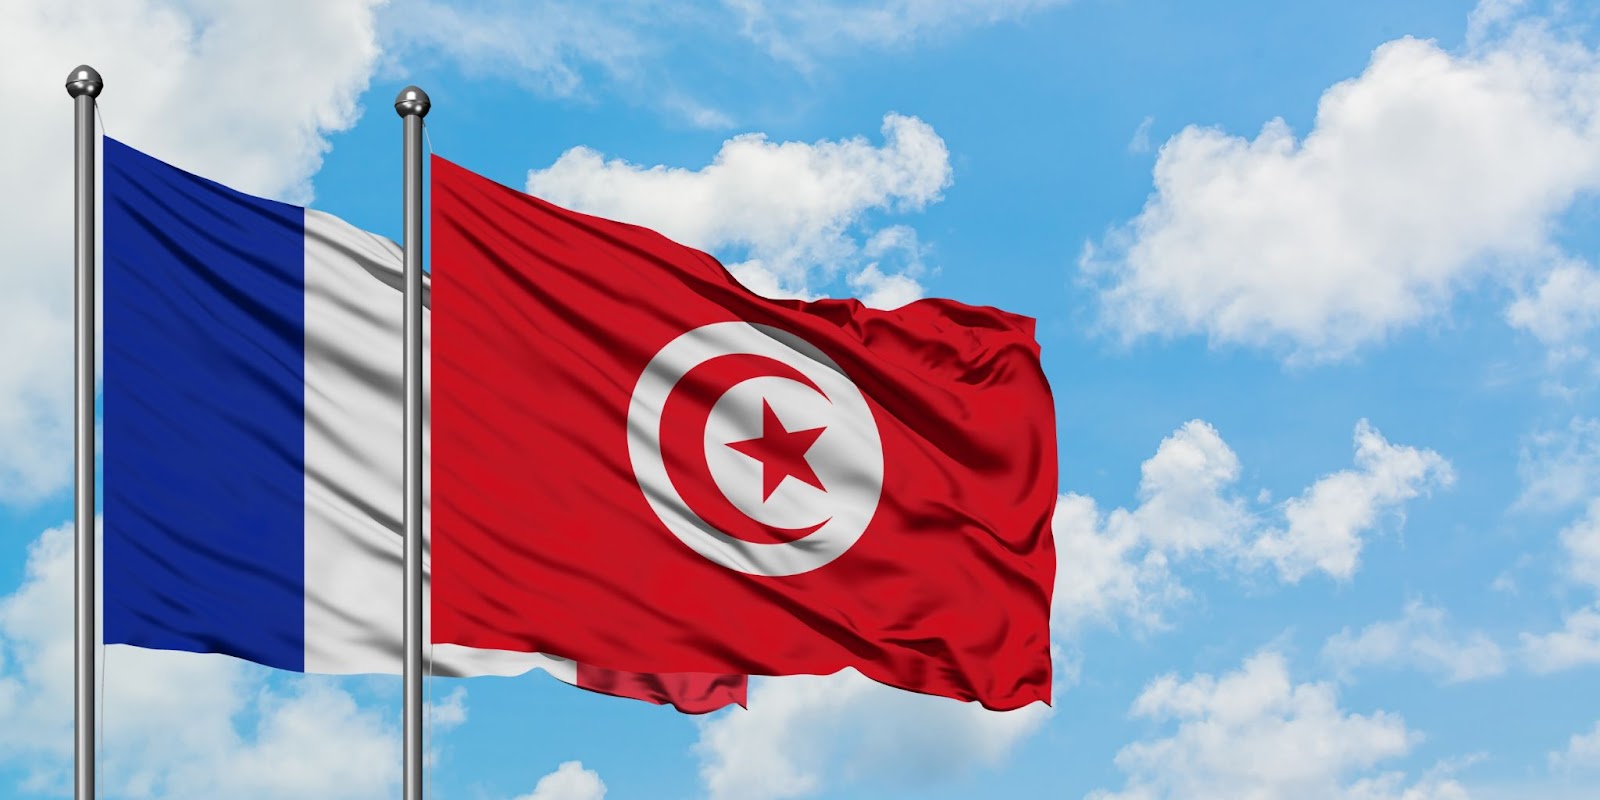 France and Tunisia flag waving in the wind against white cloudy blue sky together